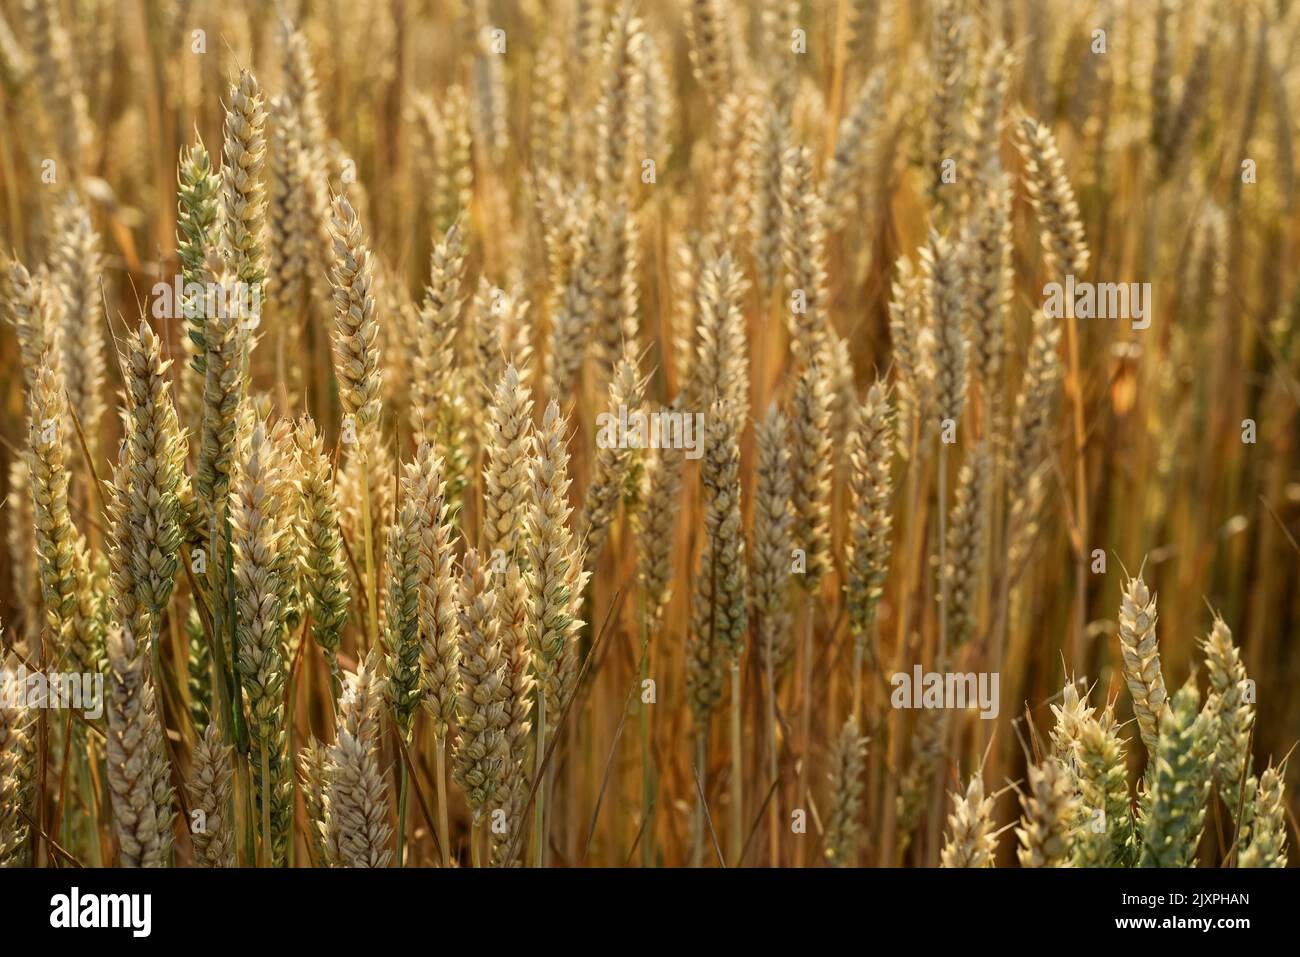 Wheat field with golden spikelets close up Stock Photo